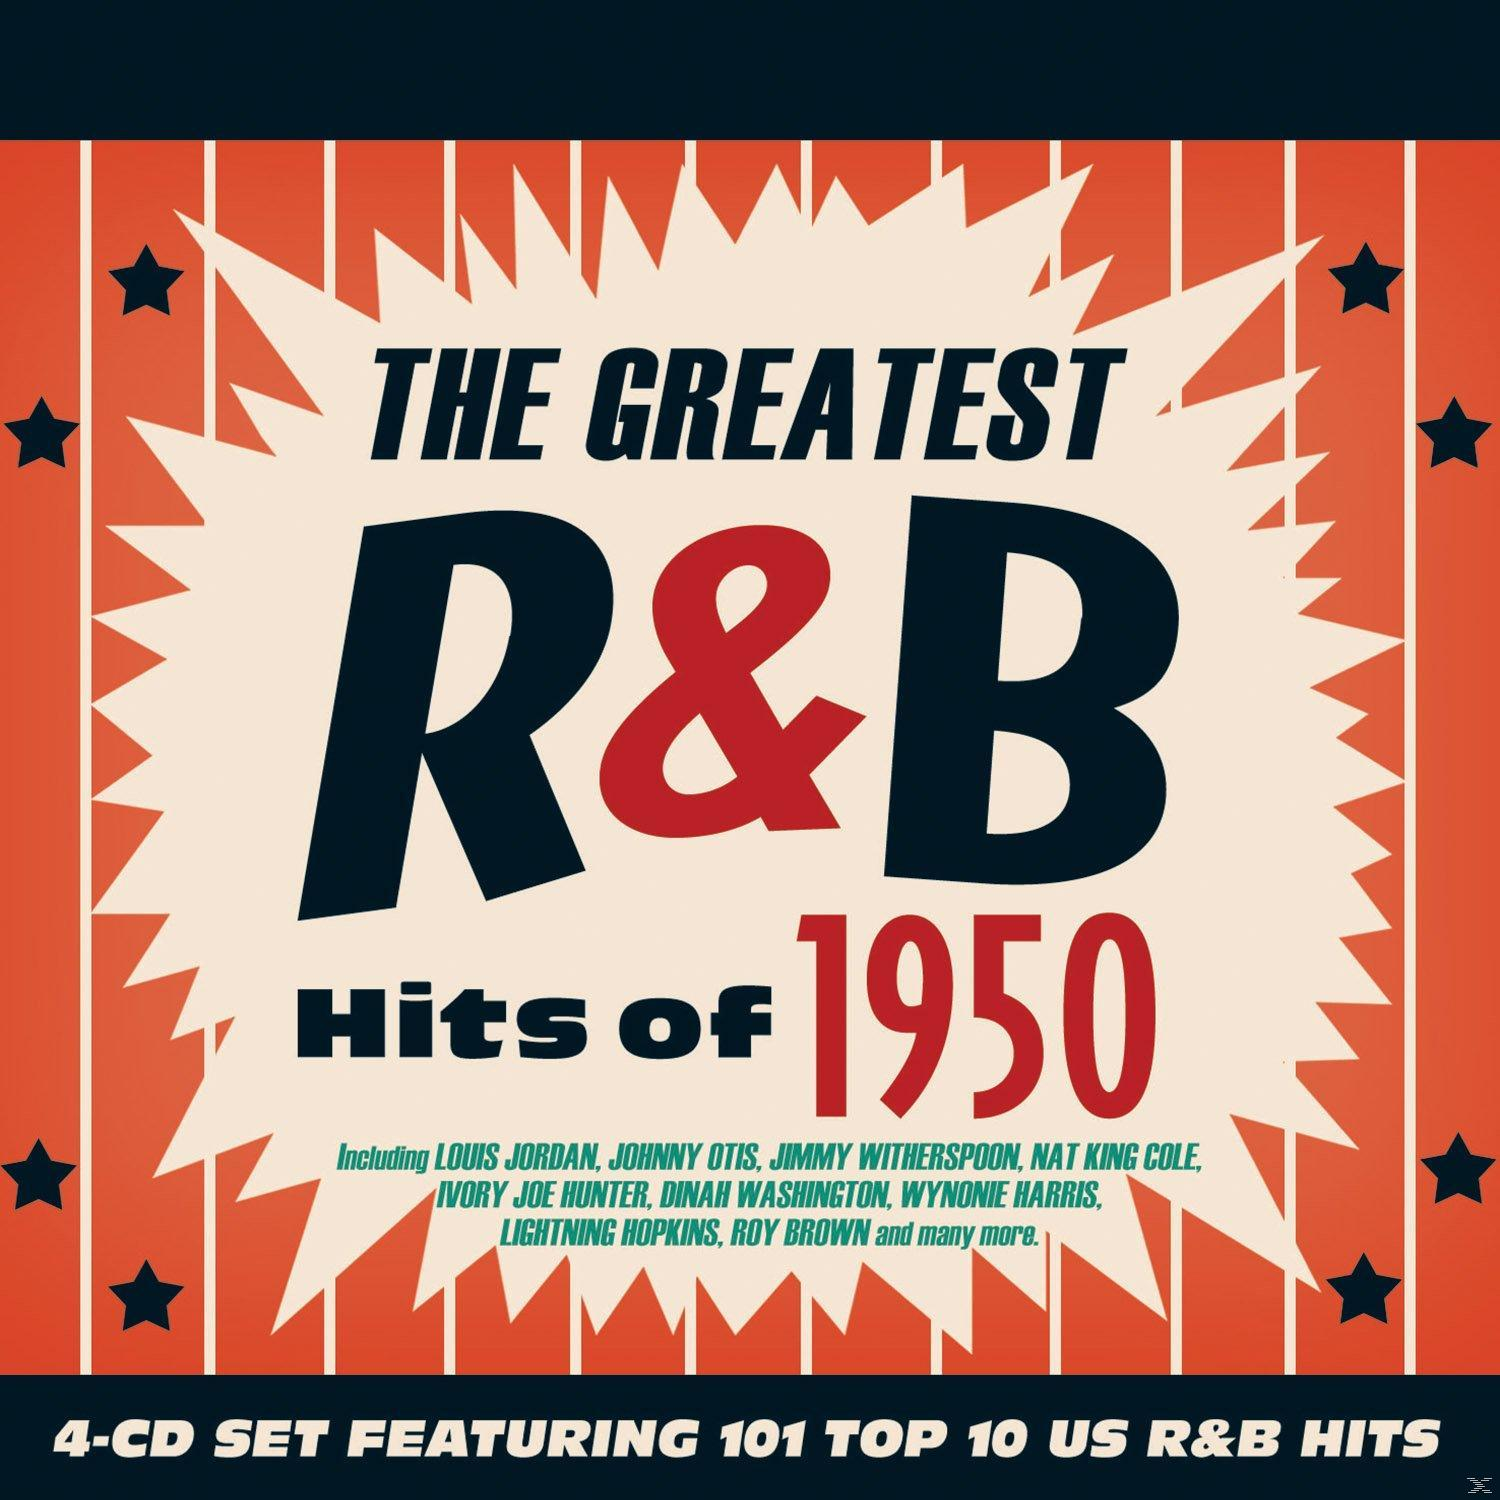 VARIOUS - The 1950 - Of Hits (CD) Greatest R&B